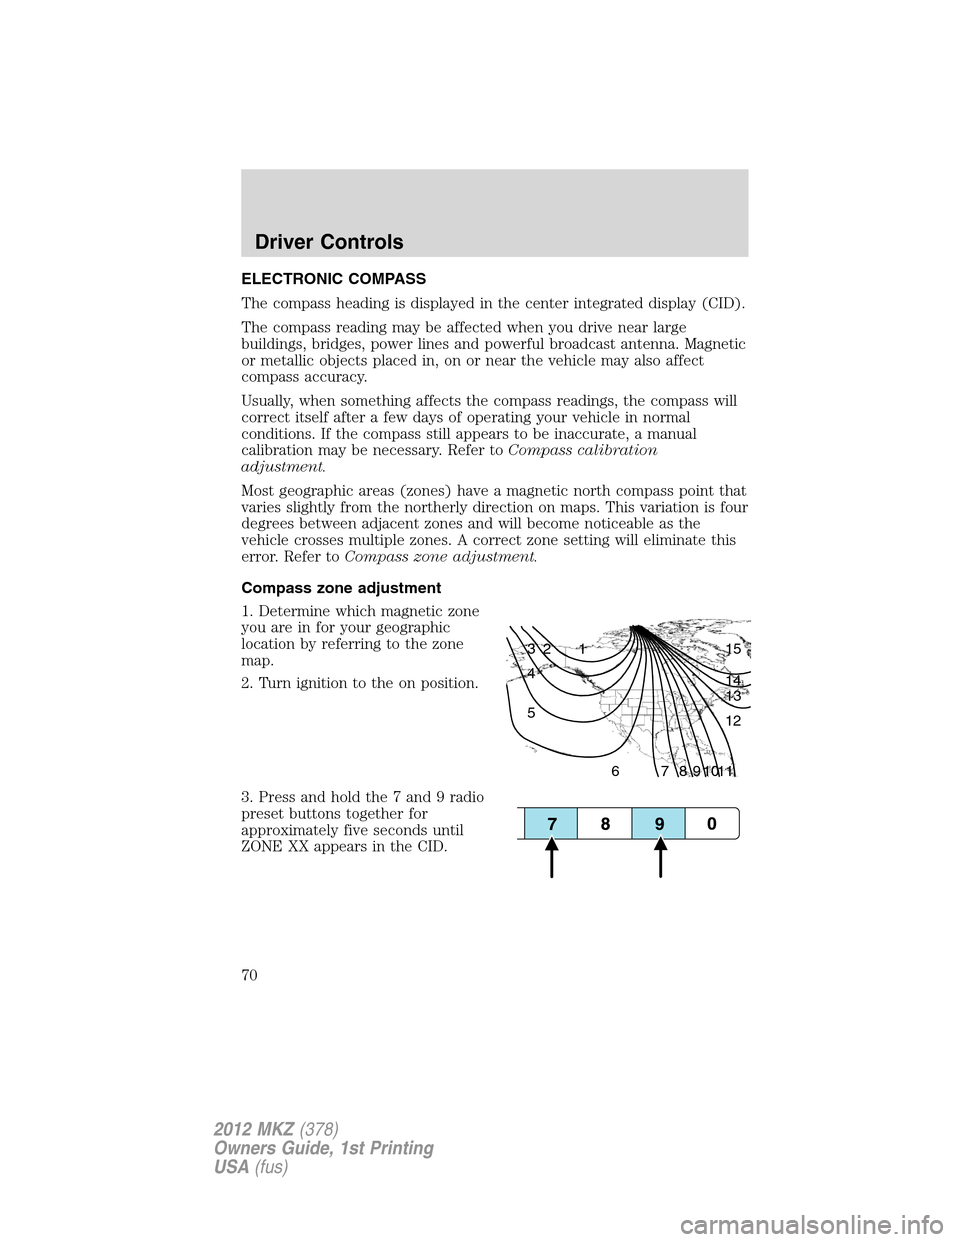 LINCOLN MKZ 2012 Repair Manual ELECTRONIC COMPASS
The compass heading is displayed in the center integrated display (CID).
The compass reading may be affected when you drive near large
buildings, bridges, power lines and powerful b